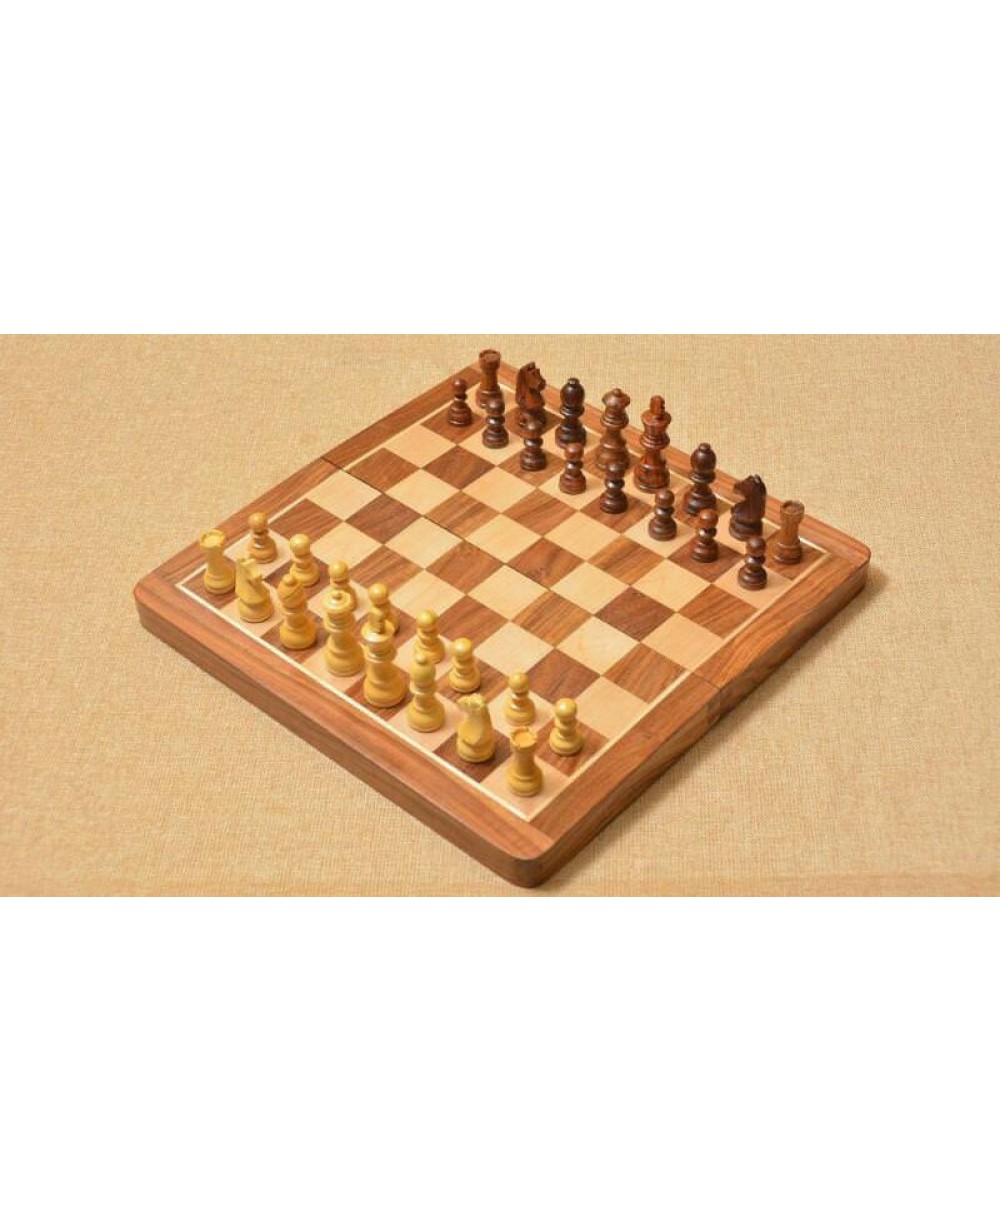 Handmade European Wooden Chess Set with 16 Inch Board and Hand Carved Chess 